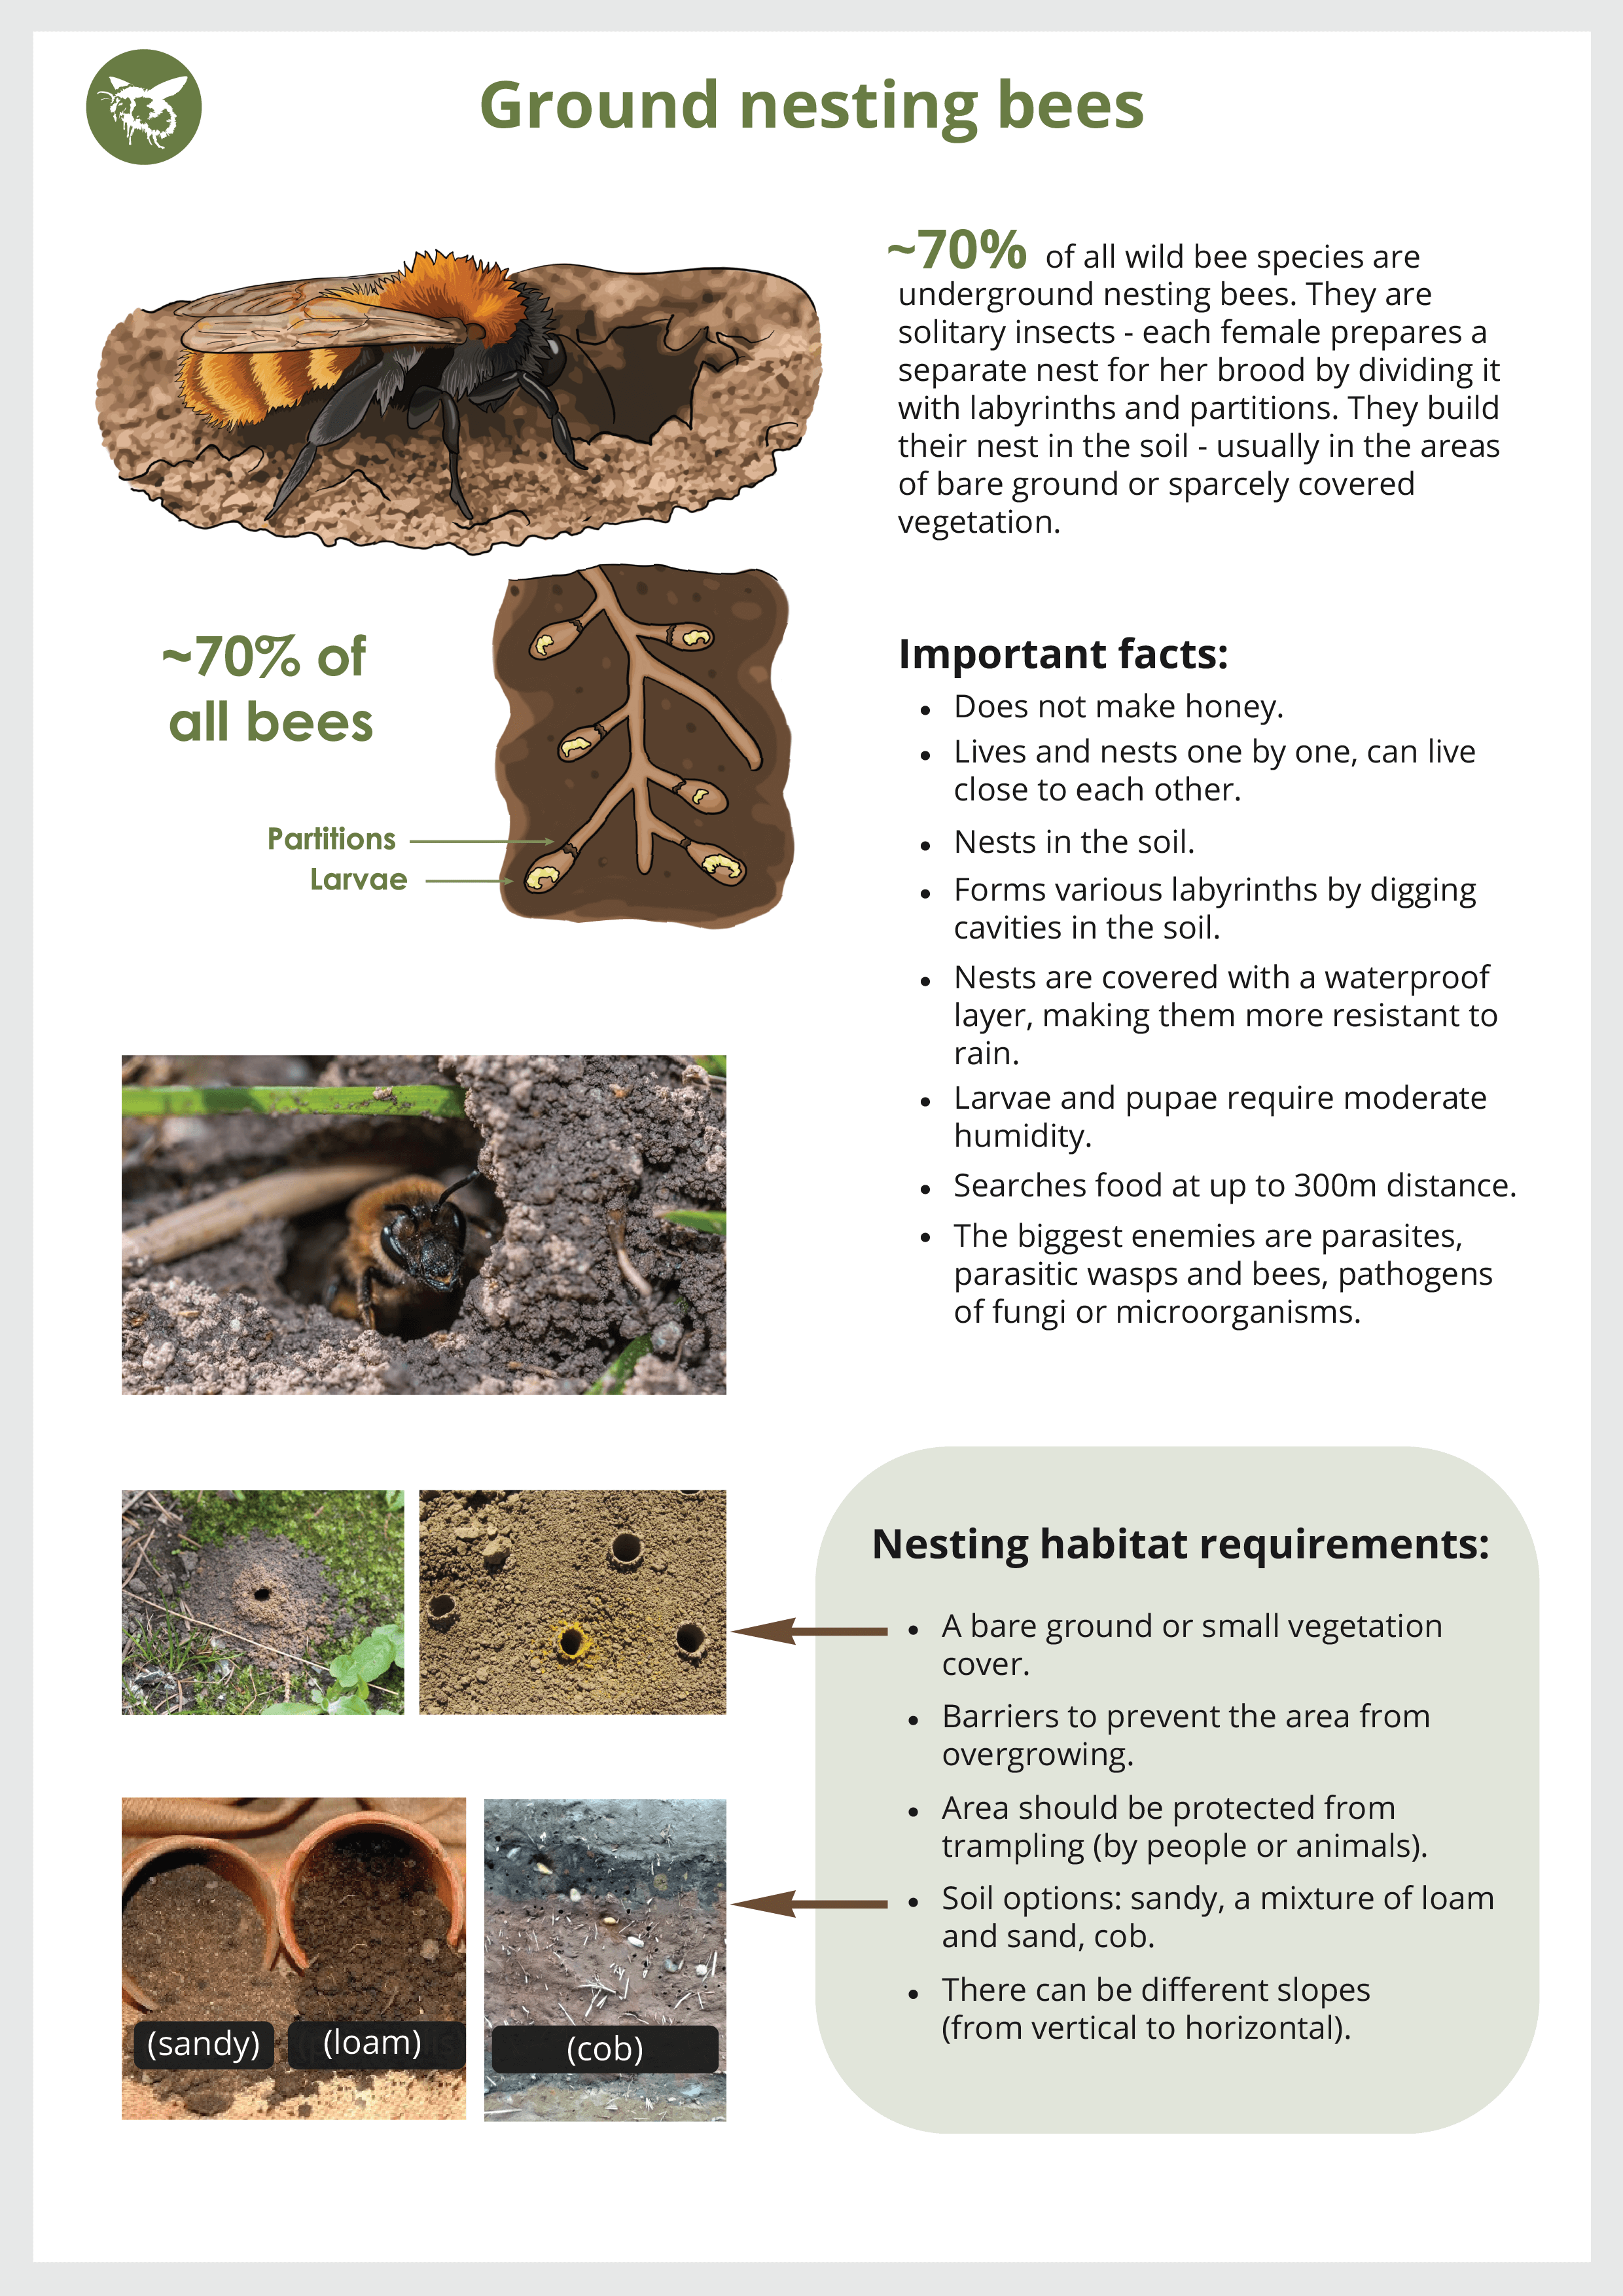 Memo for the participants about ground nesting bees